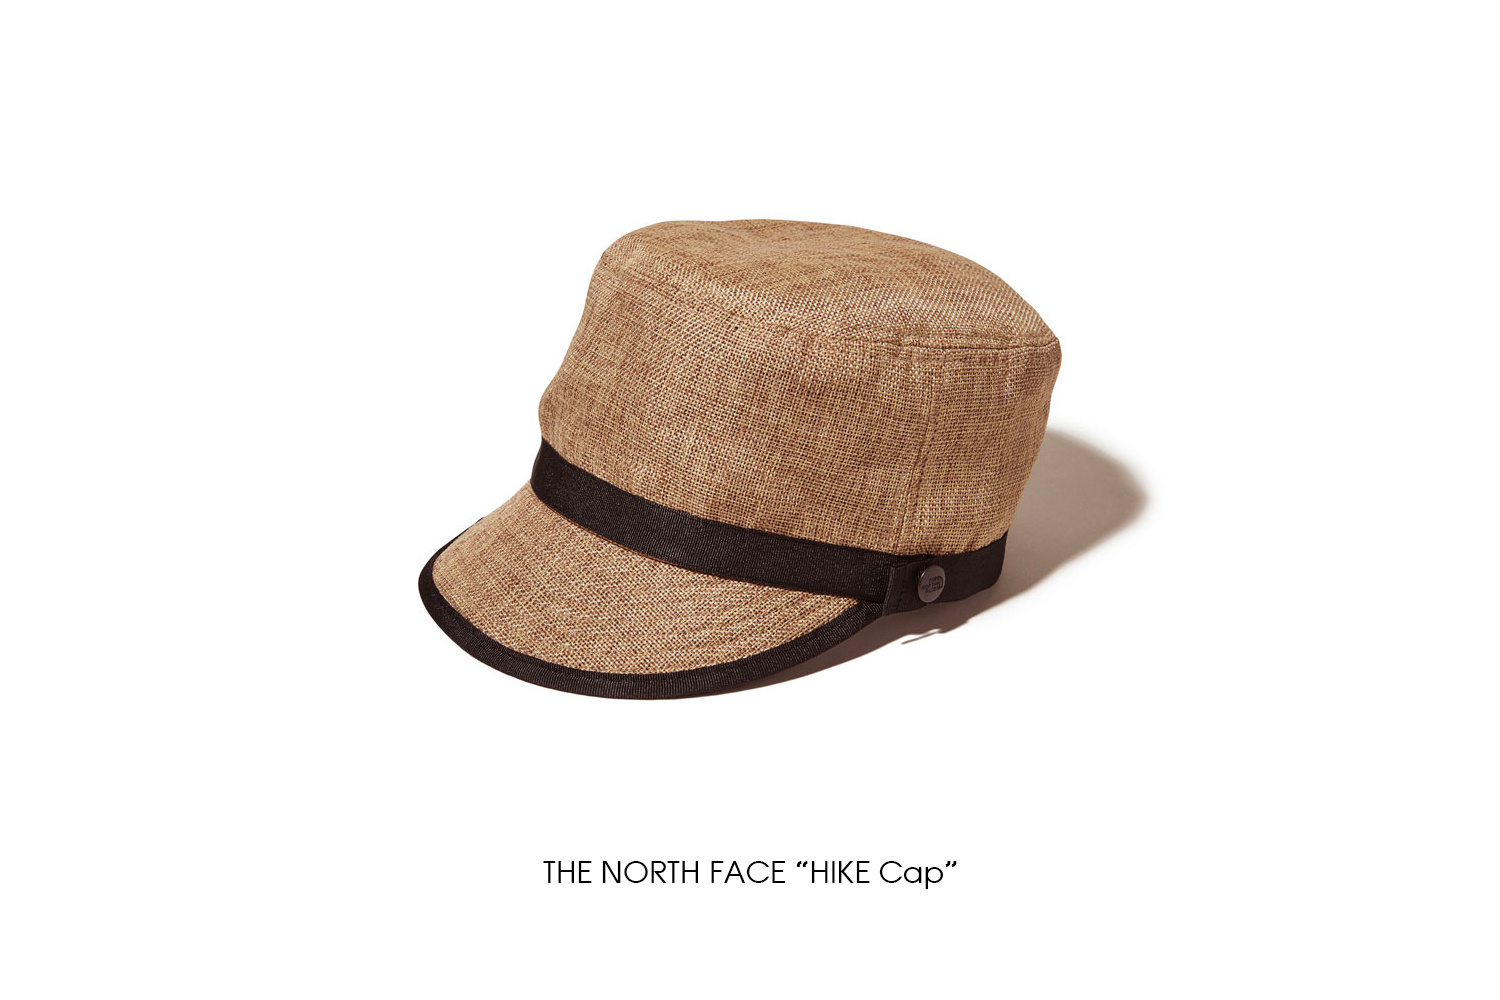 THE NORTH FACE "HIKE Cap"